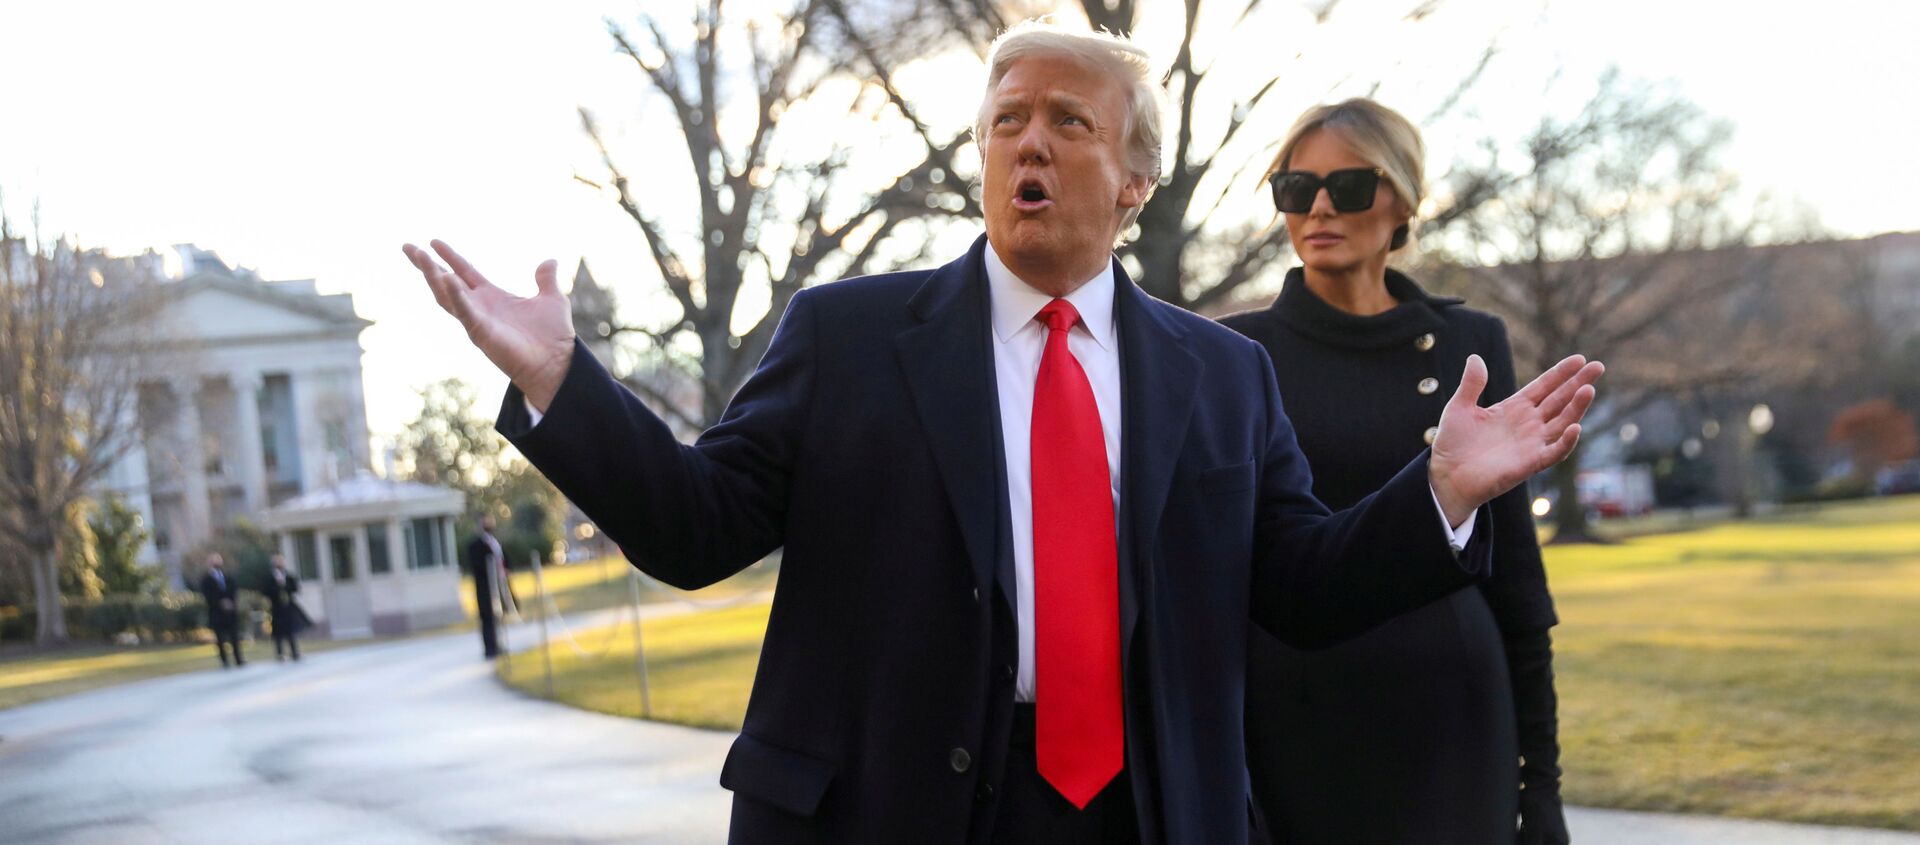 US President Donald Trump gestures as he and first lady Melania Trump depart the White House to board Marine One ahead of the inauguration of president-elect Joe Biden, in Washington, DC, 20 January 2021. - Sputnik International, 1920, 21.03.2021